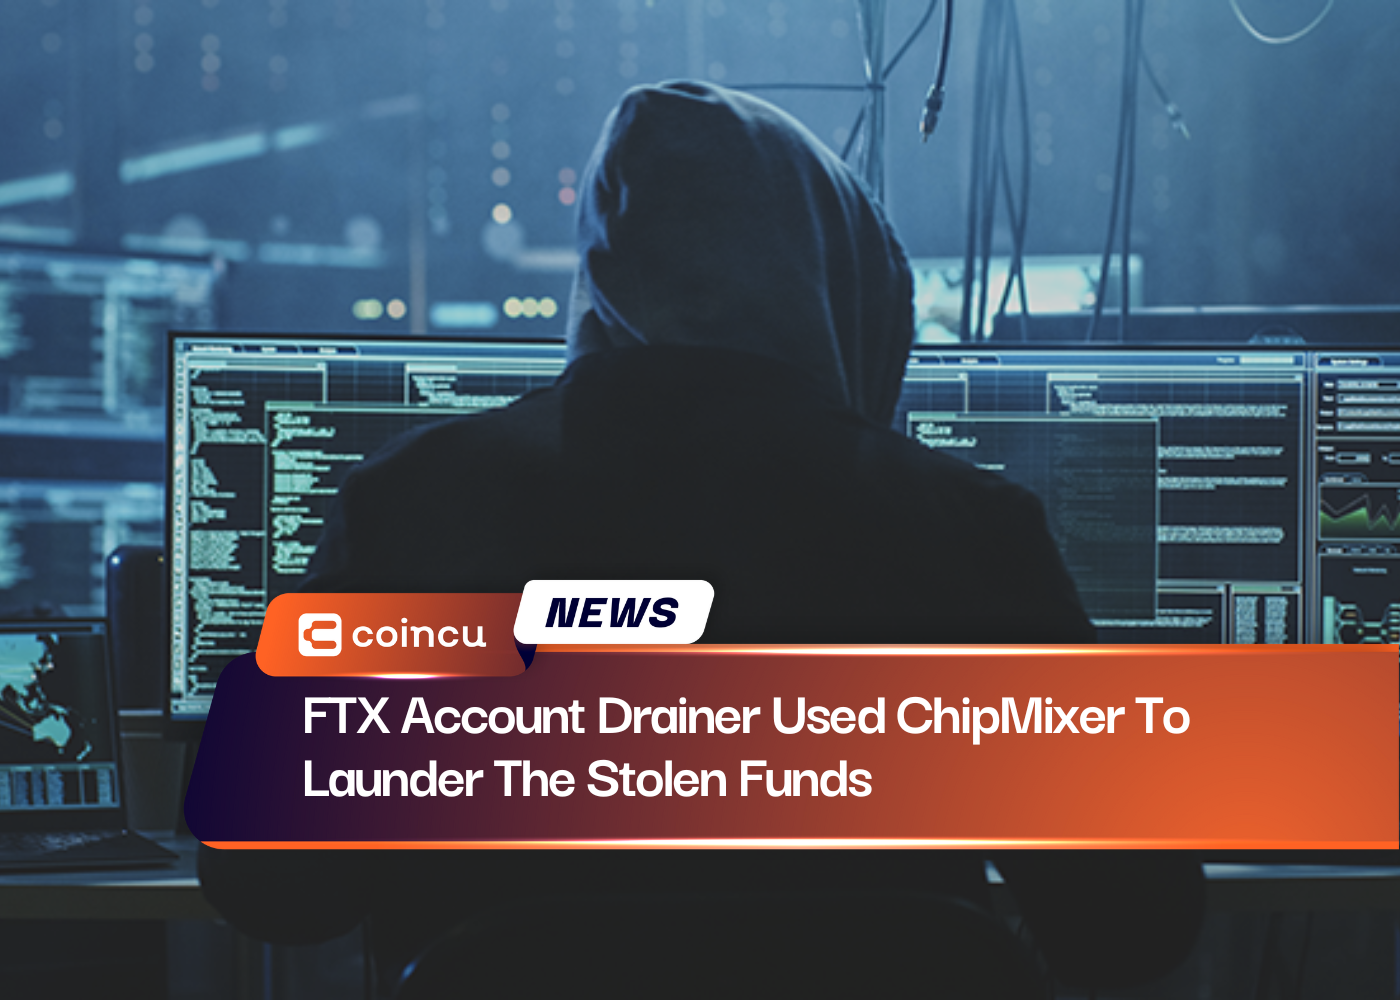 FTX Account Drainer Used ChipMixer To Launder The Stolen Funds